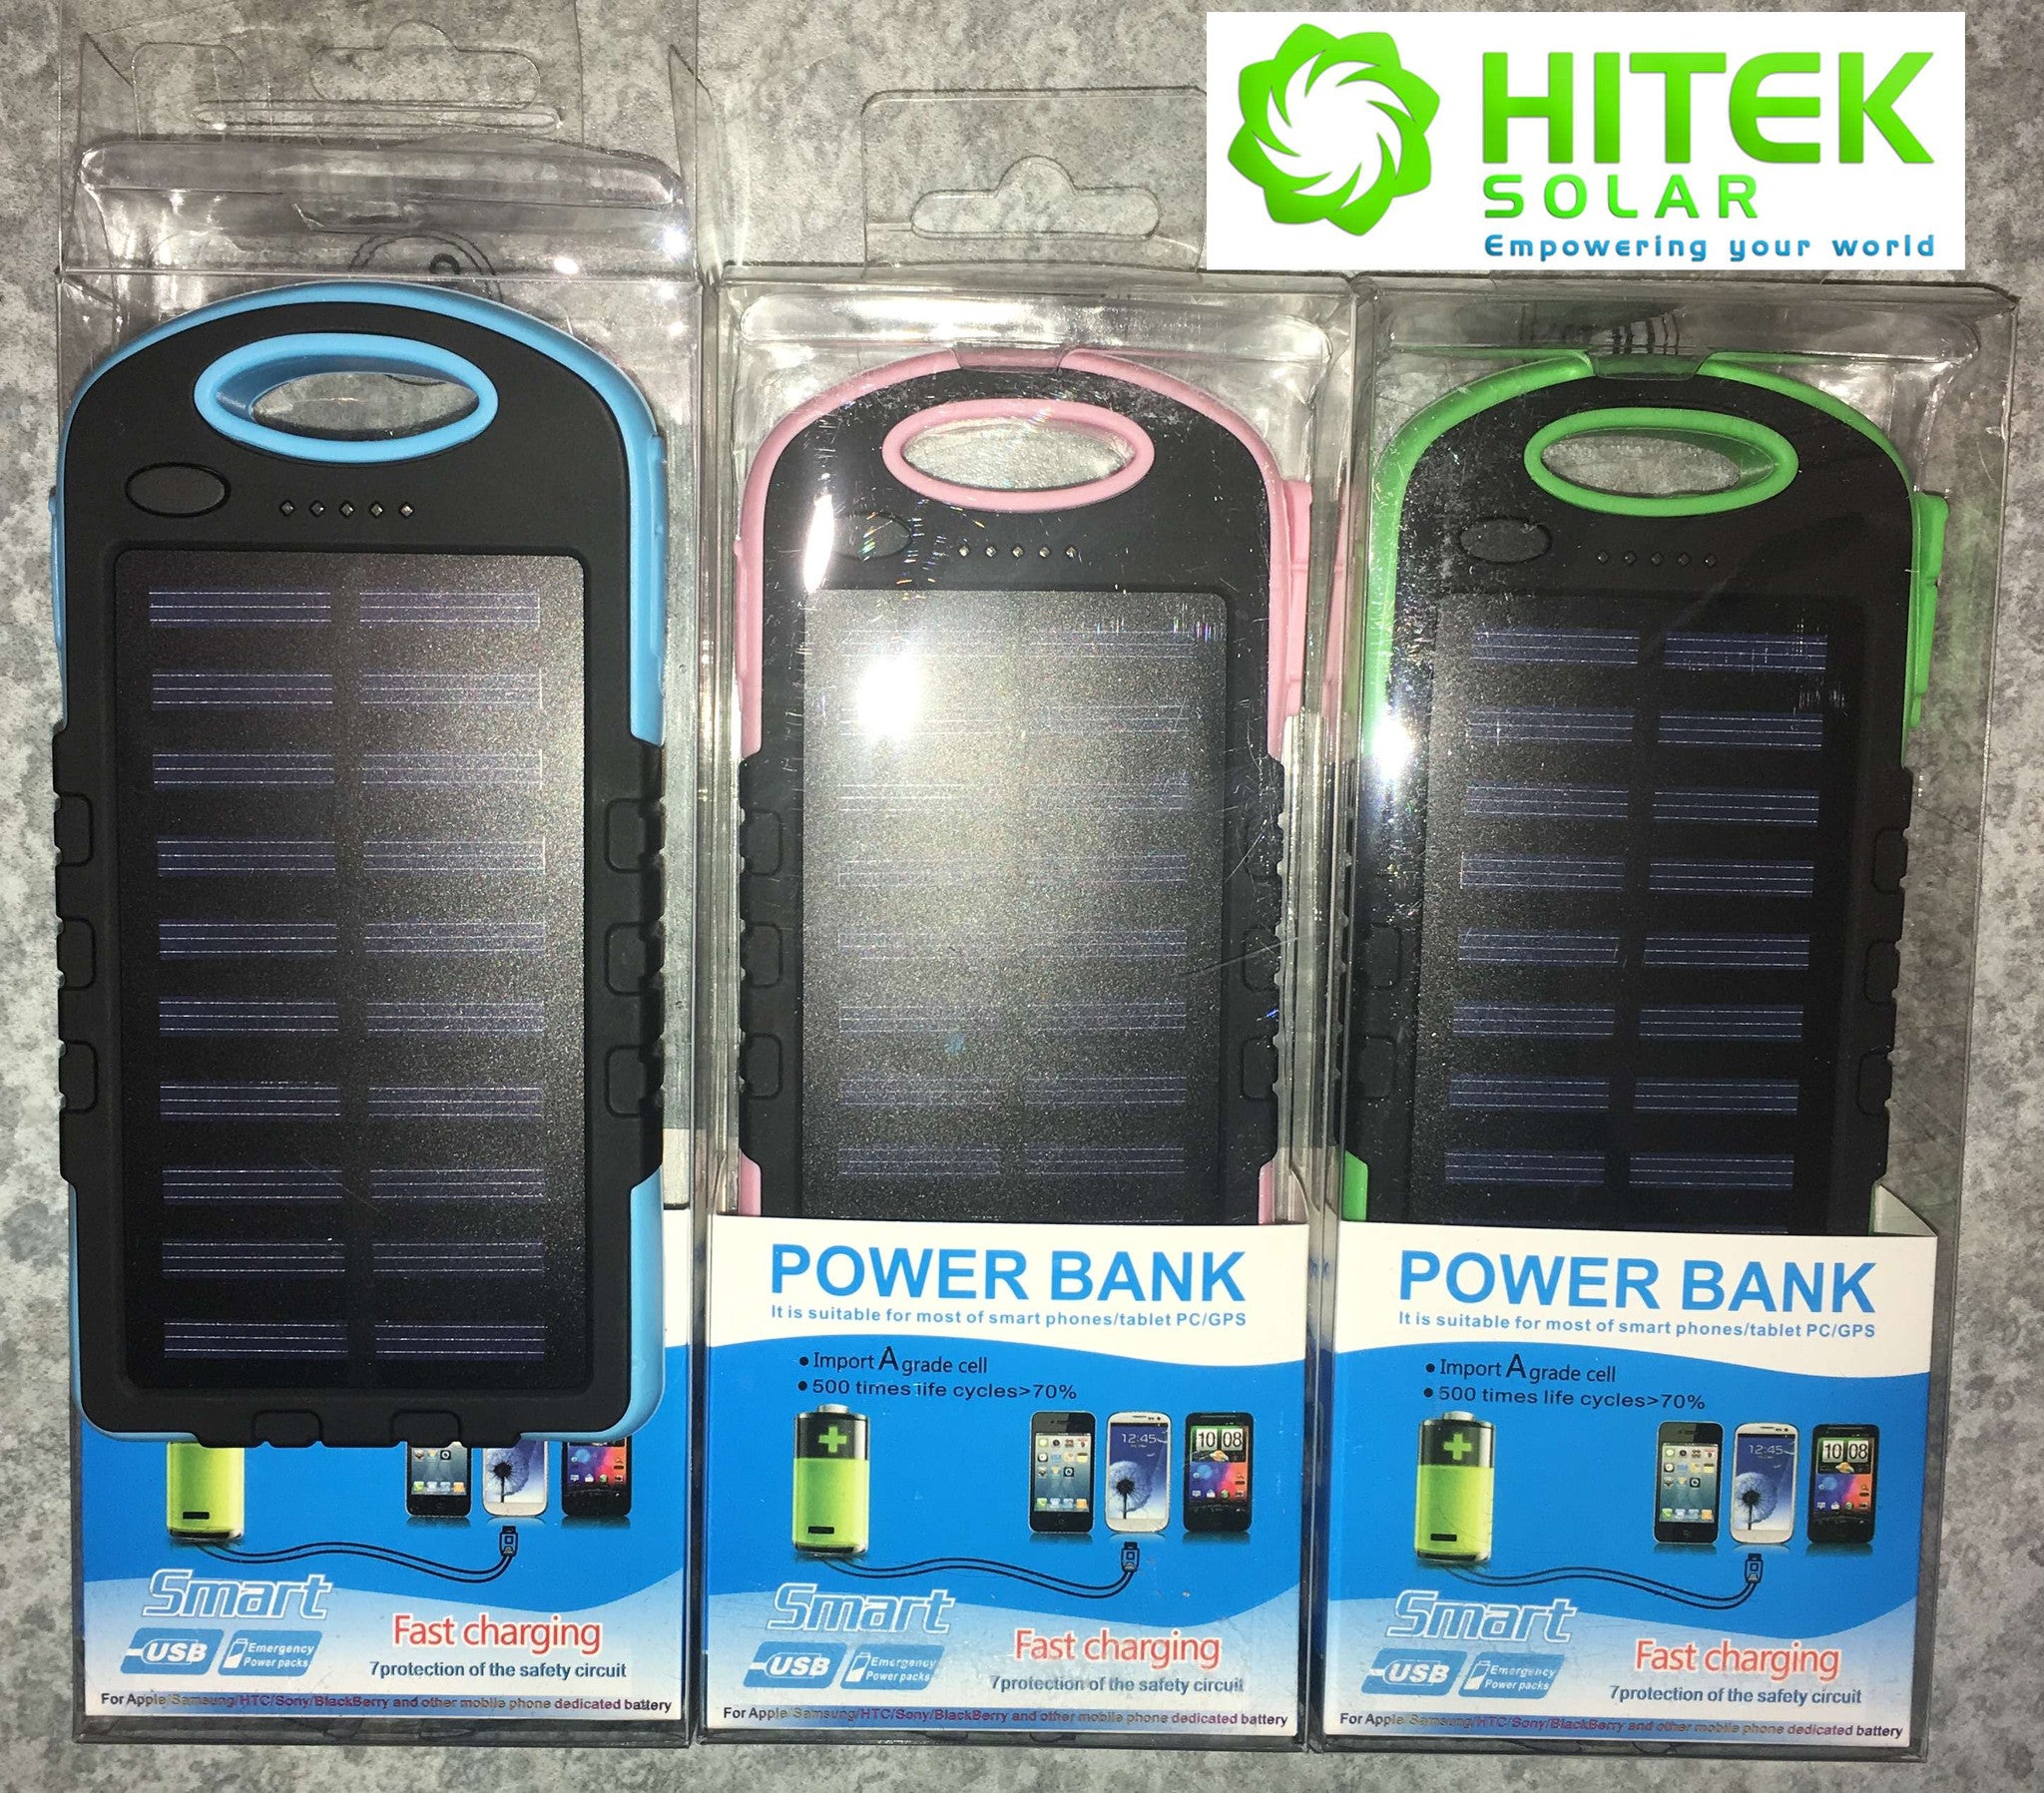 Solar Charger Power Bank - 8000mAh Lithium battery storage + 12